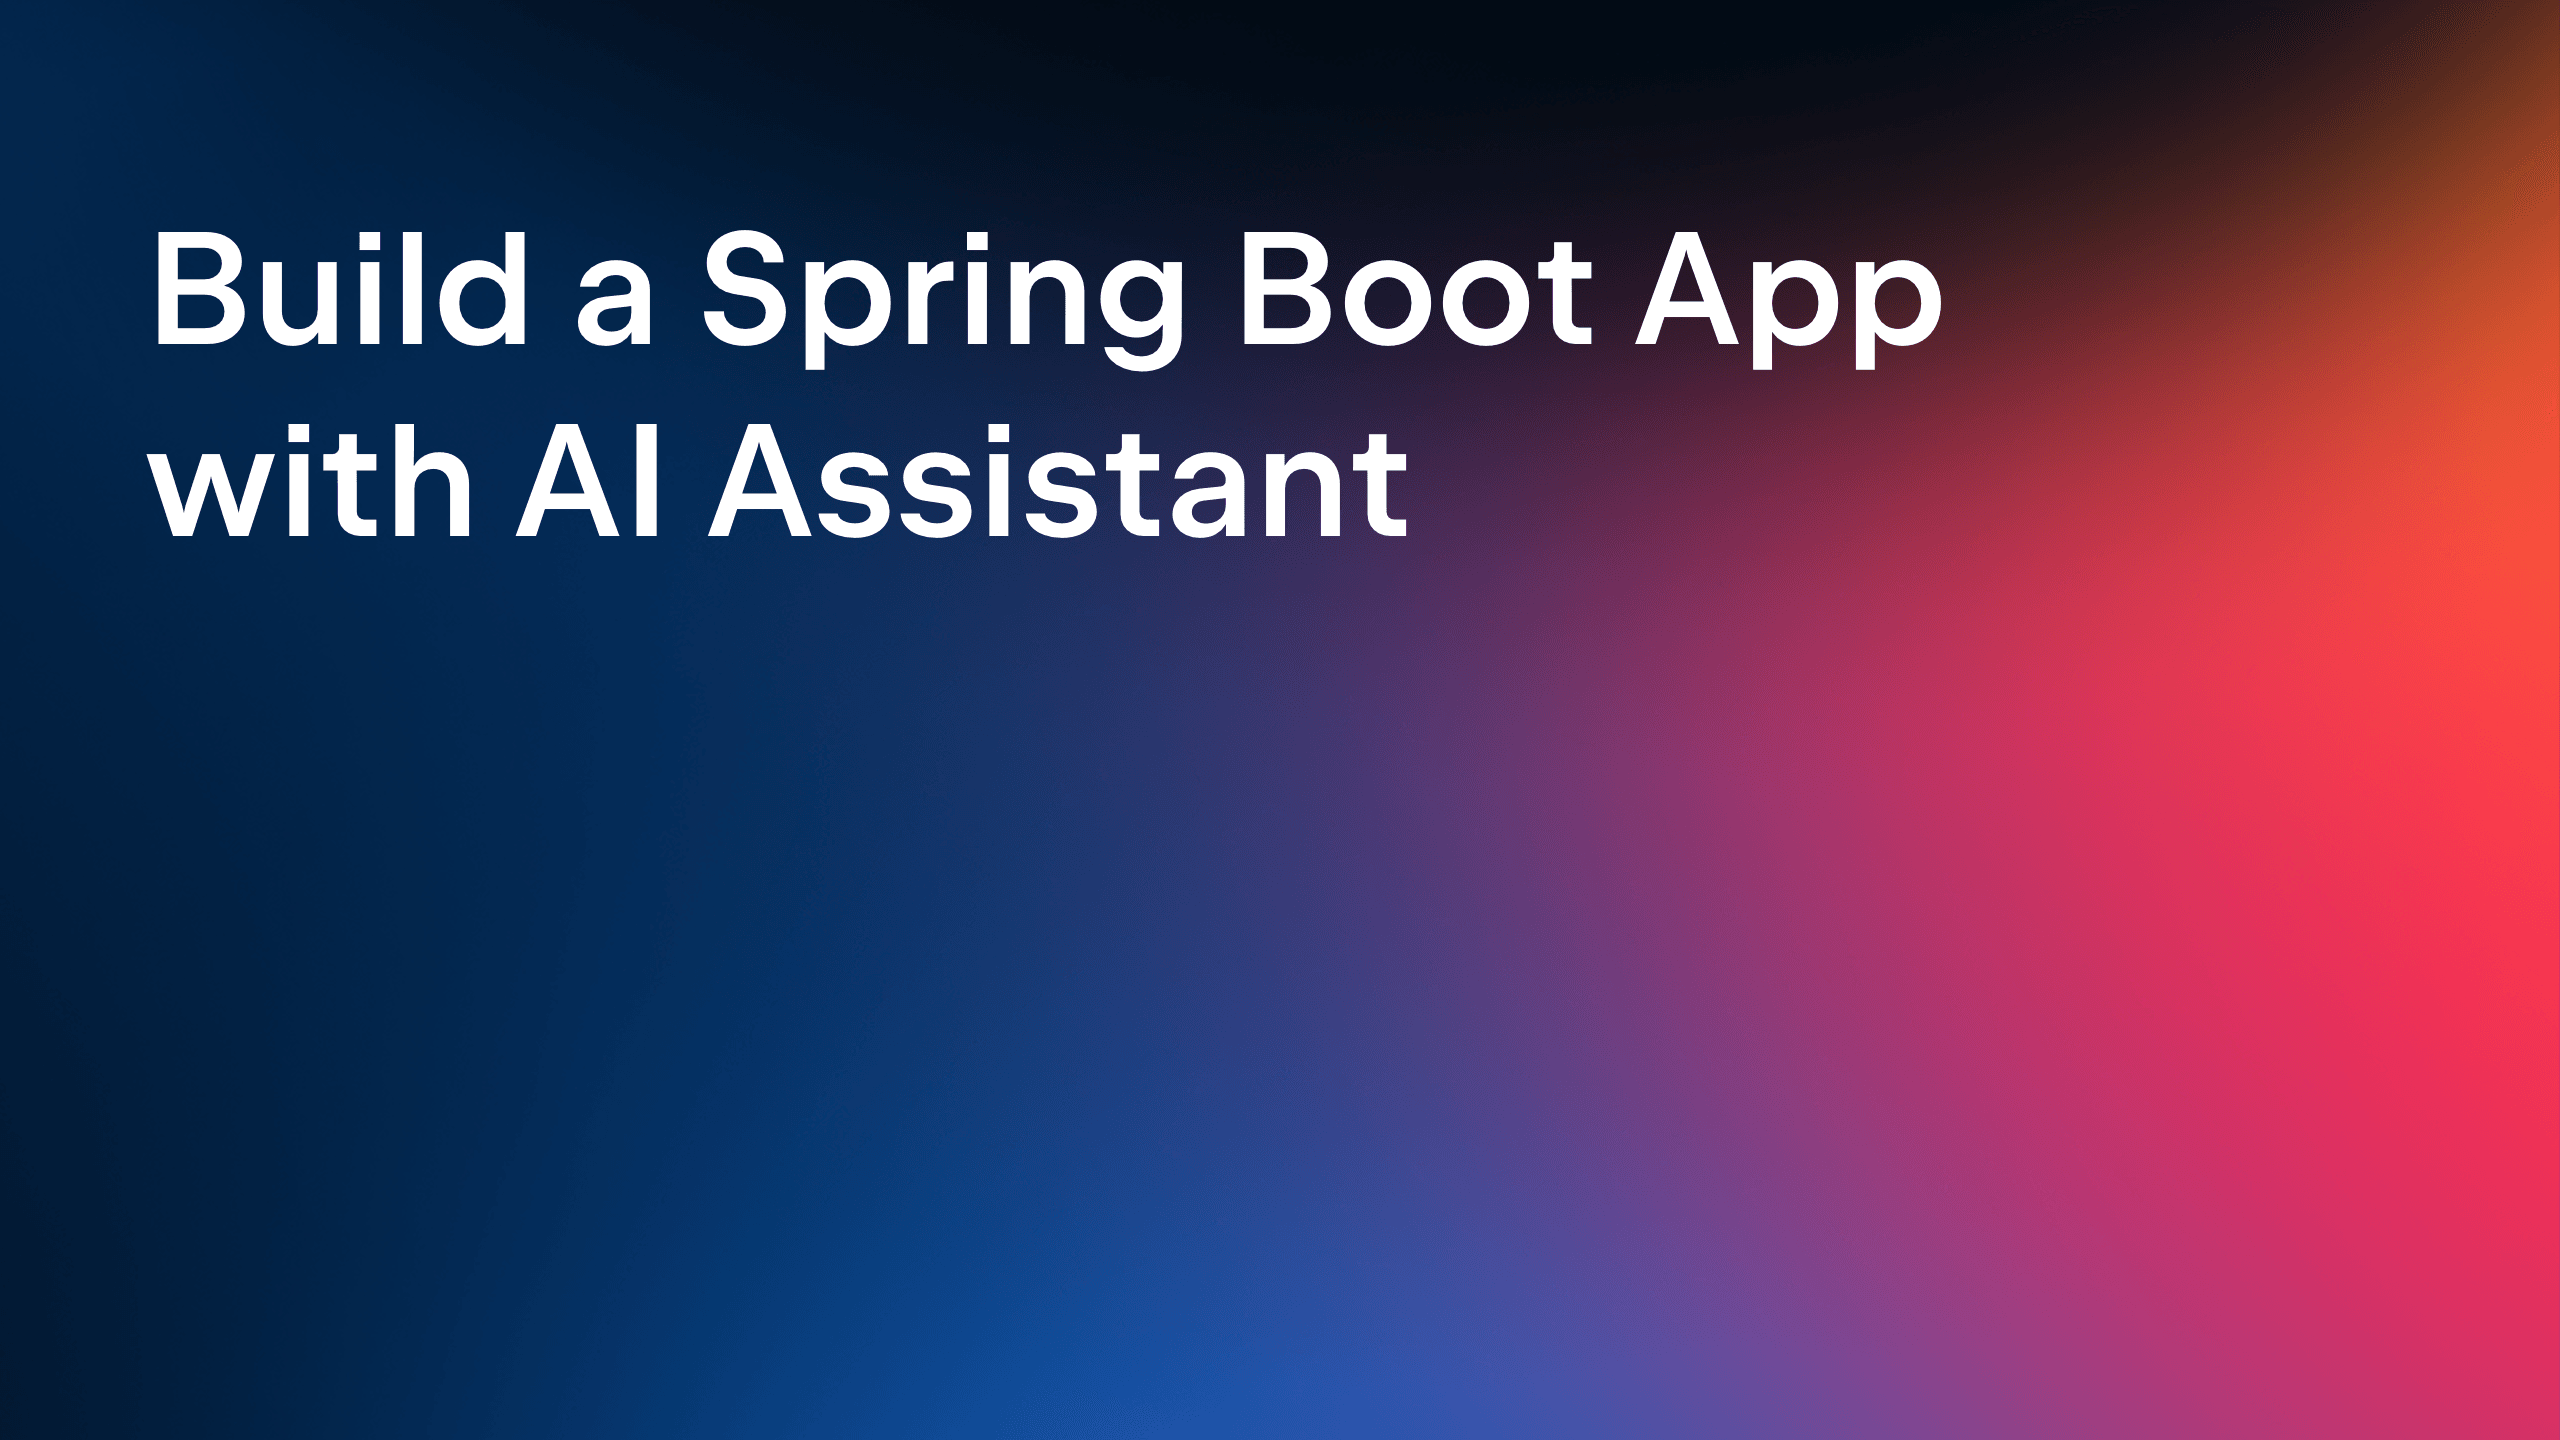 Build a Spring Boot App with AI Assistant